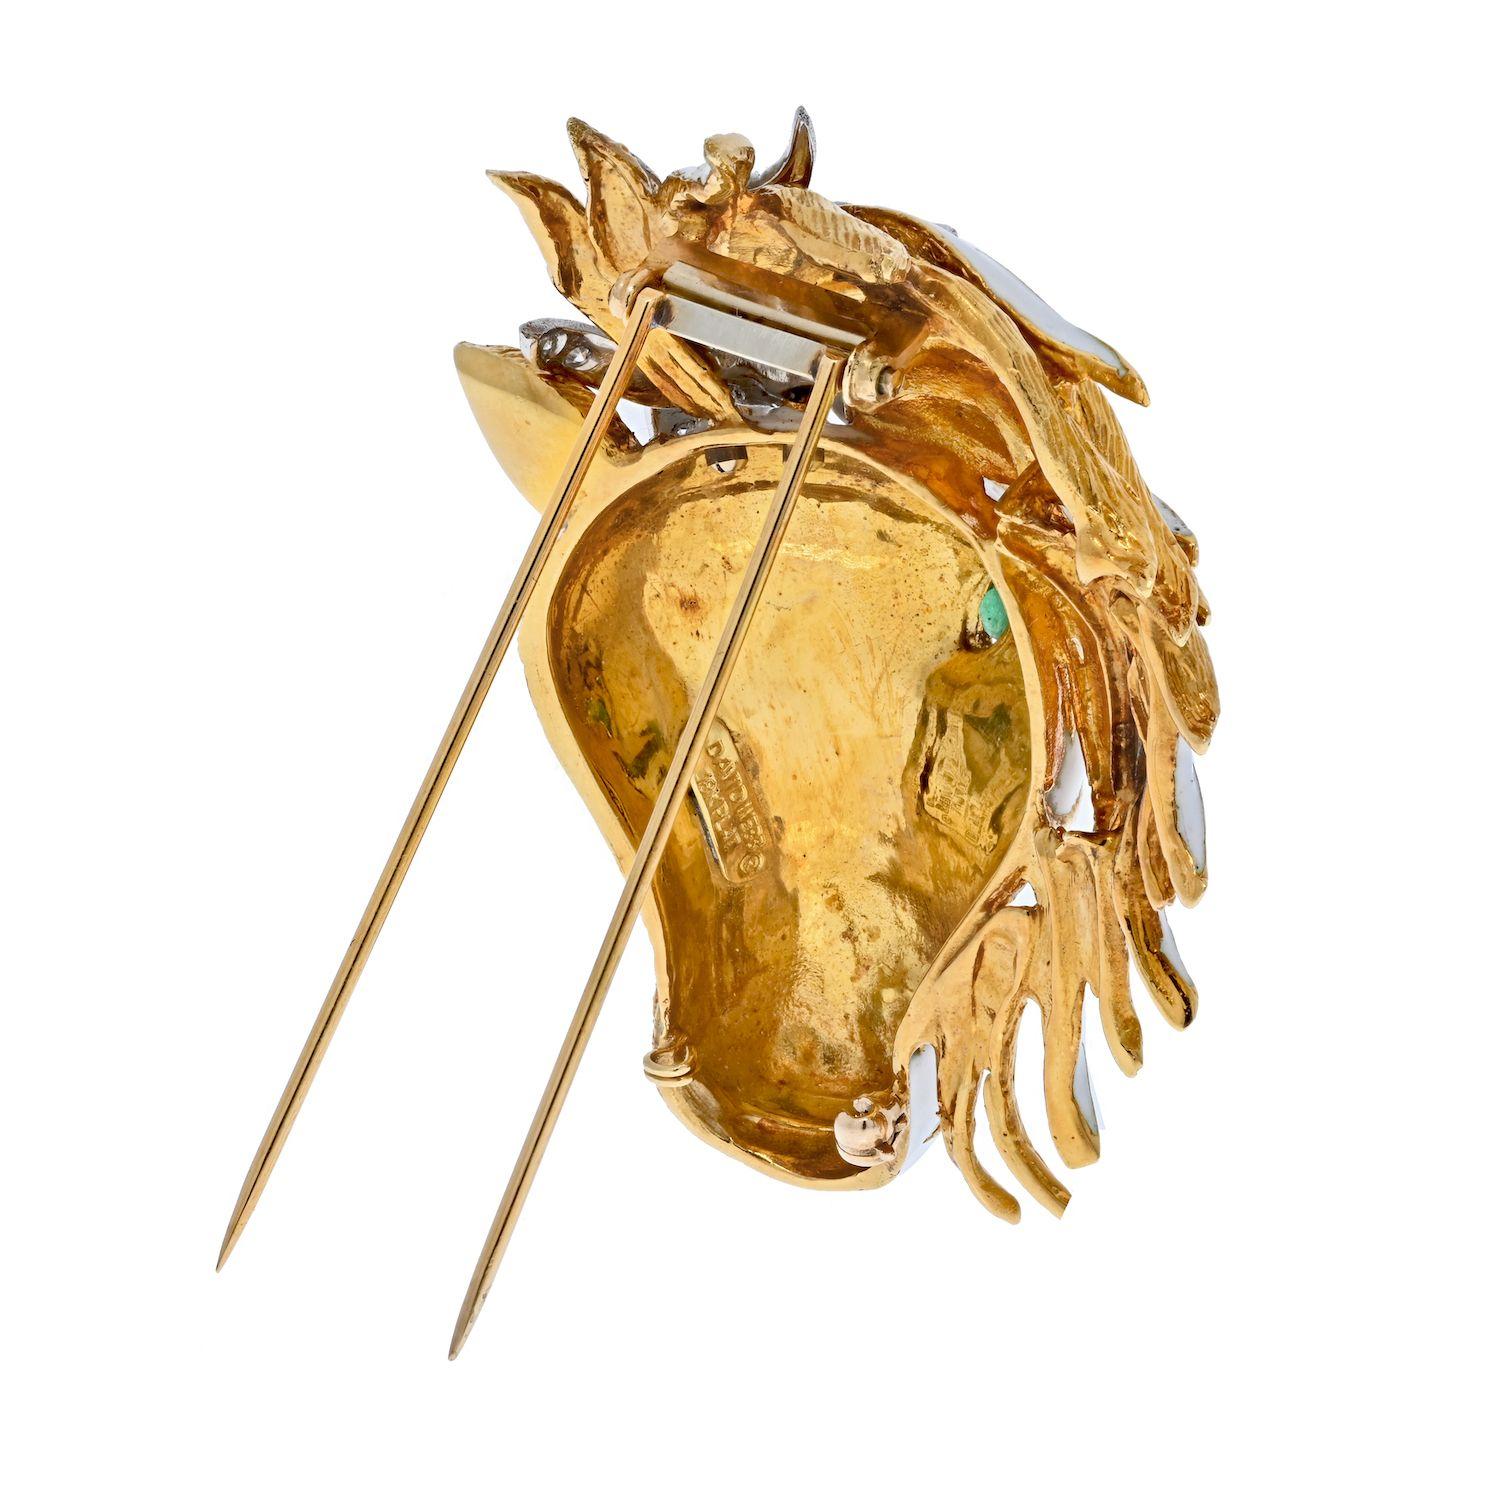 This is an exciting horse head brooch with white enamel and featuring (1) emerald eye and (34) round diamonds. Measuring about 6cm long. Fastens with a double stem pin.

Brooches and pins experienced a strong comeback in 2020 and 2021 bringing a